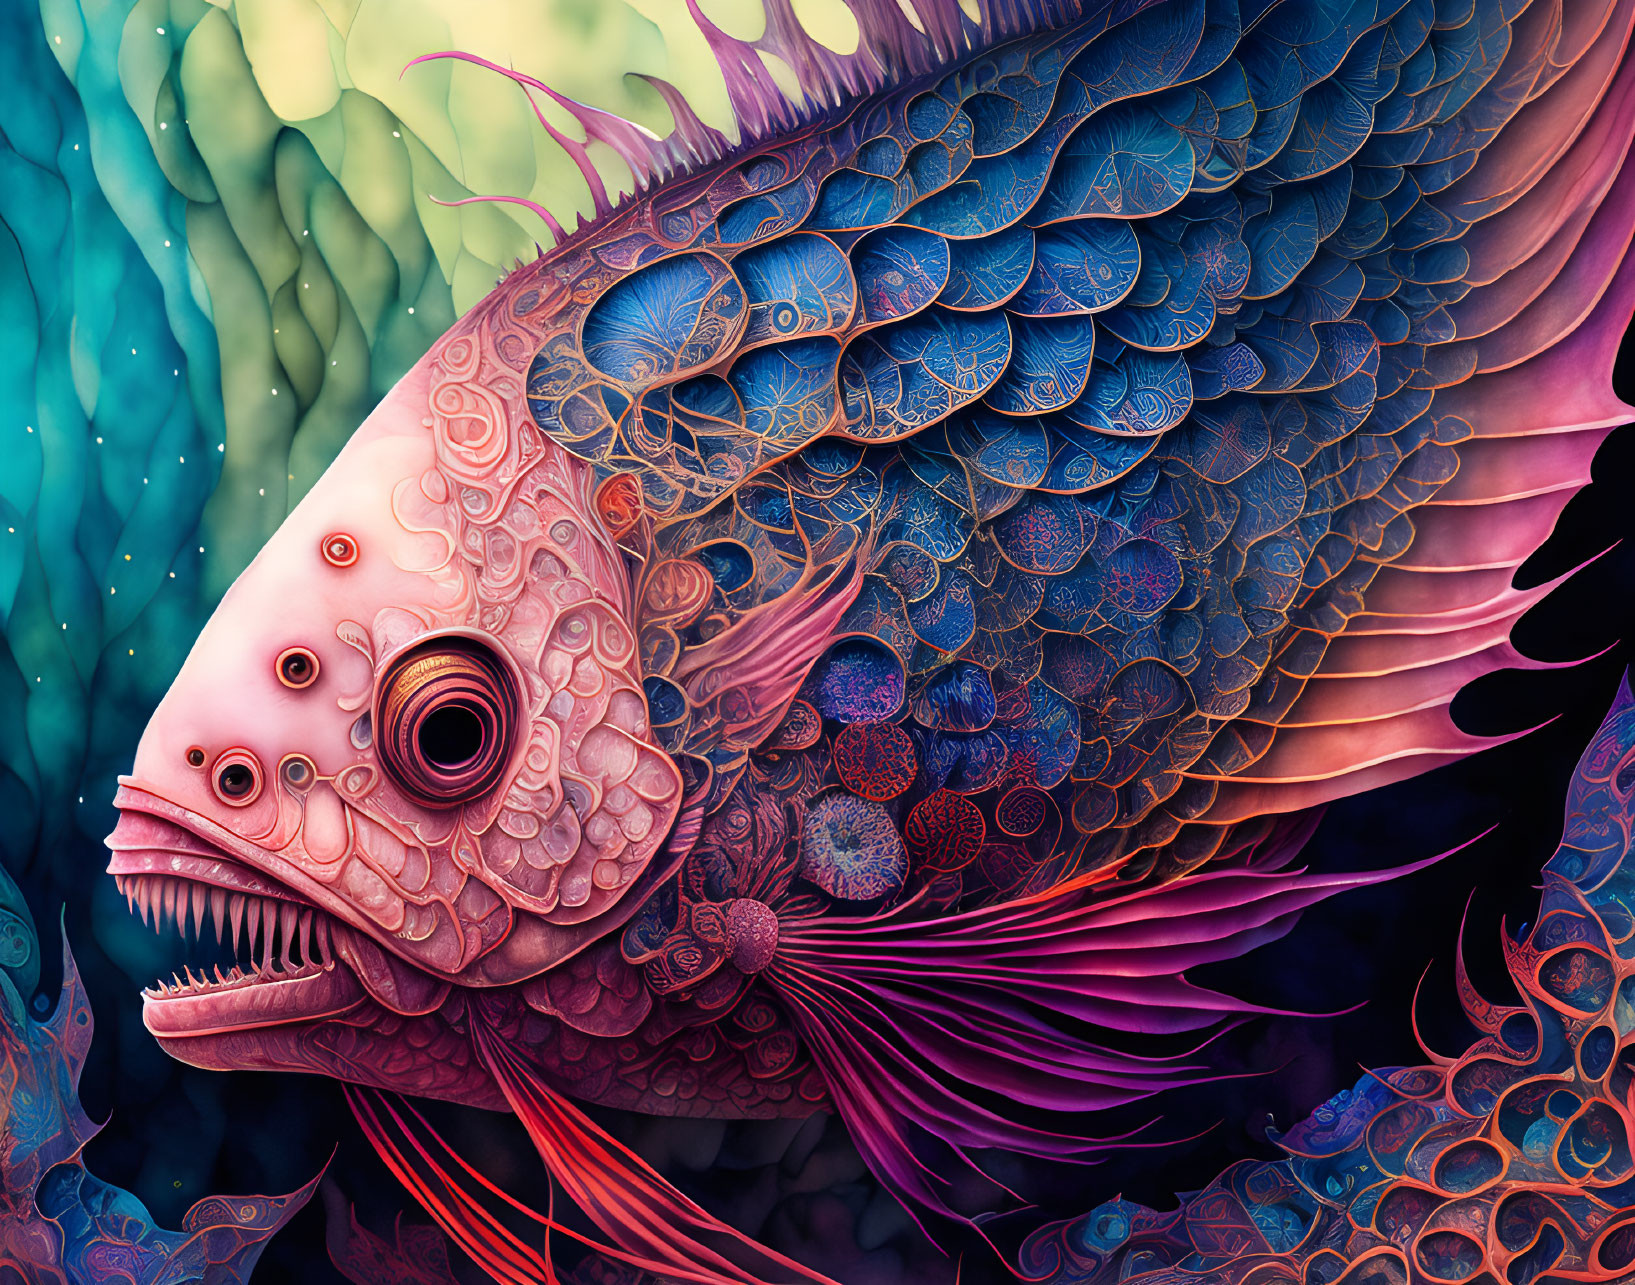 Colorful Fantastical Fish Illustration with Detailed Scales on Dark Background